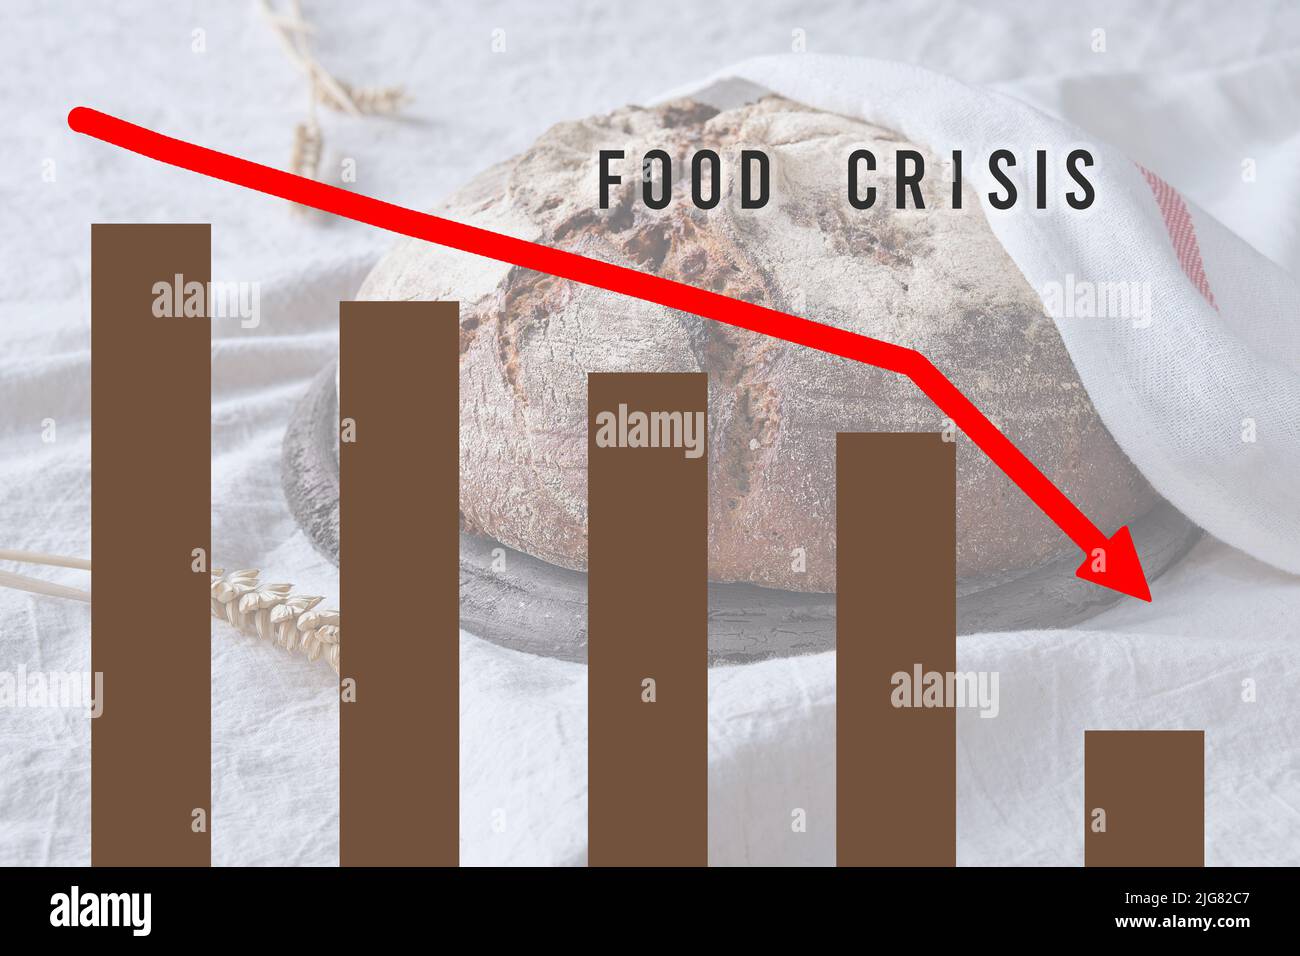 Text Food crisis on background with loaf of dark bread on wood with linen towel. Crisis graph with negative statistics. Stock Photo